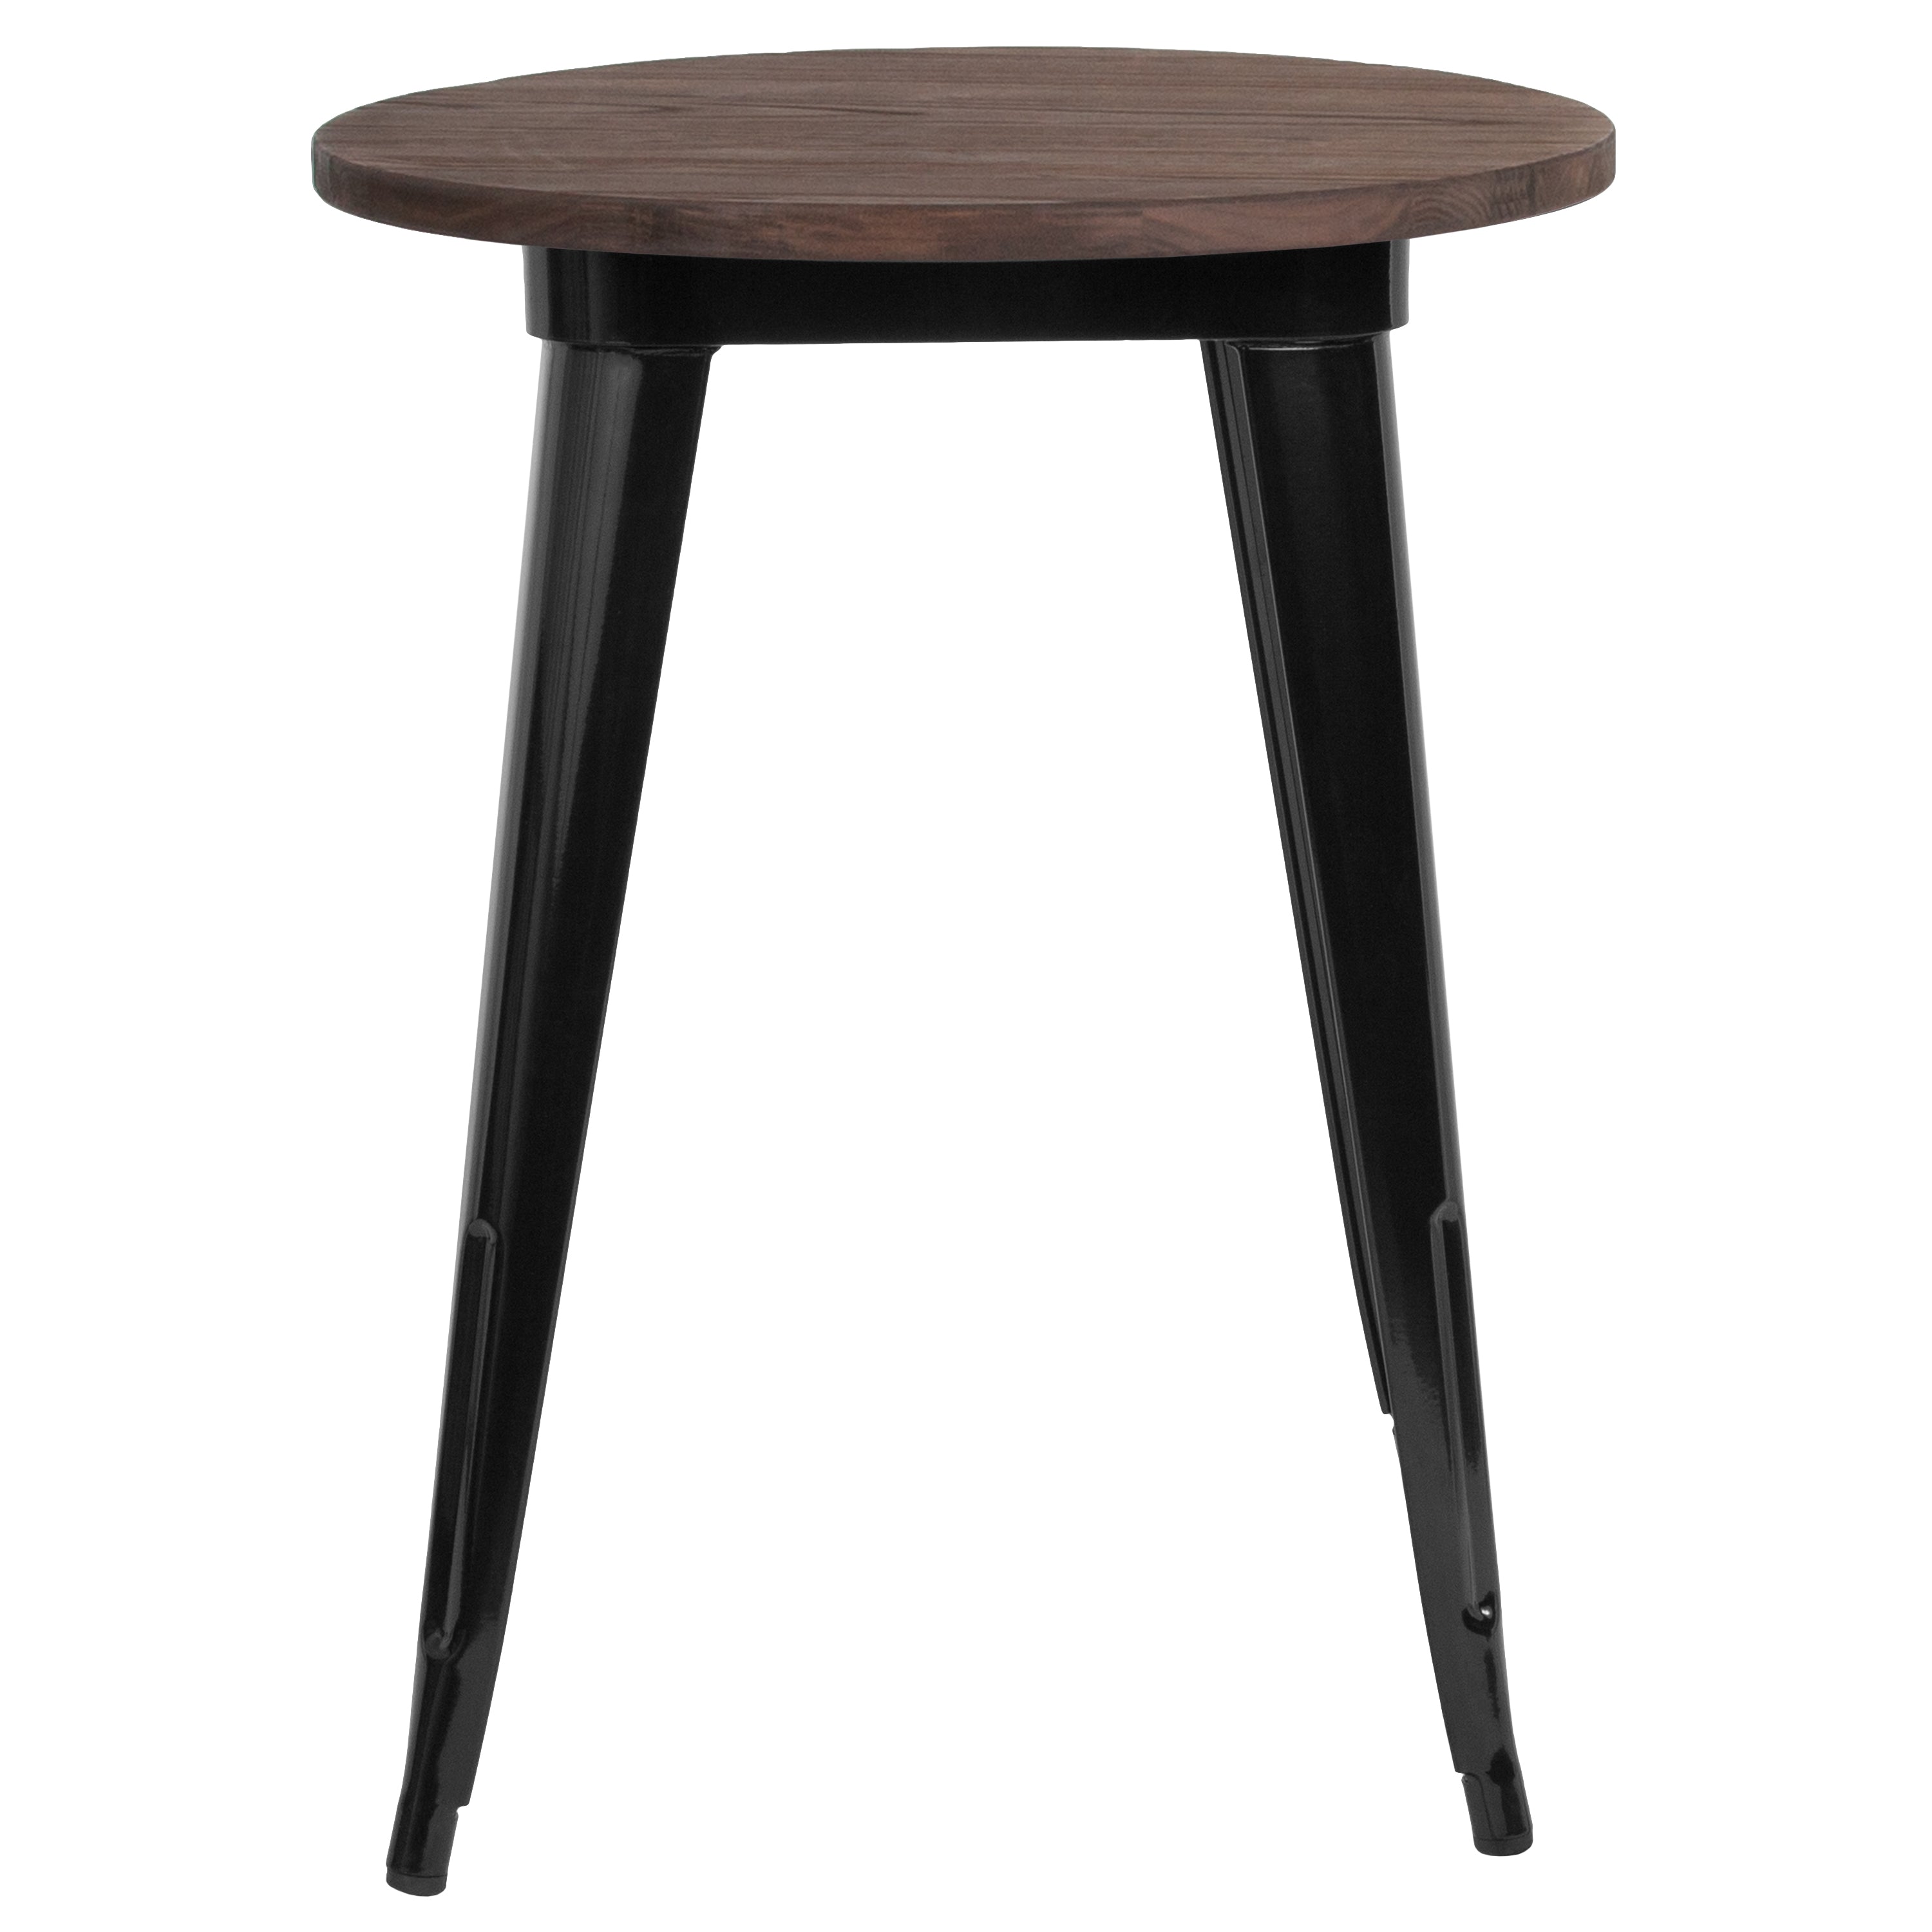 24" Round Metal Indoor Table with Rustic Wood Top-Metal/ Colorful Restaurant Table-Flash Furniture-Wall2Wall Furnishings